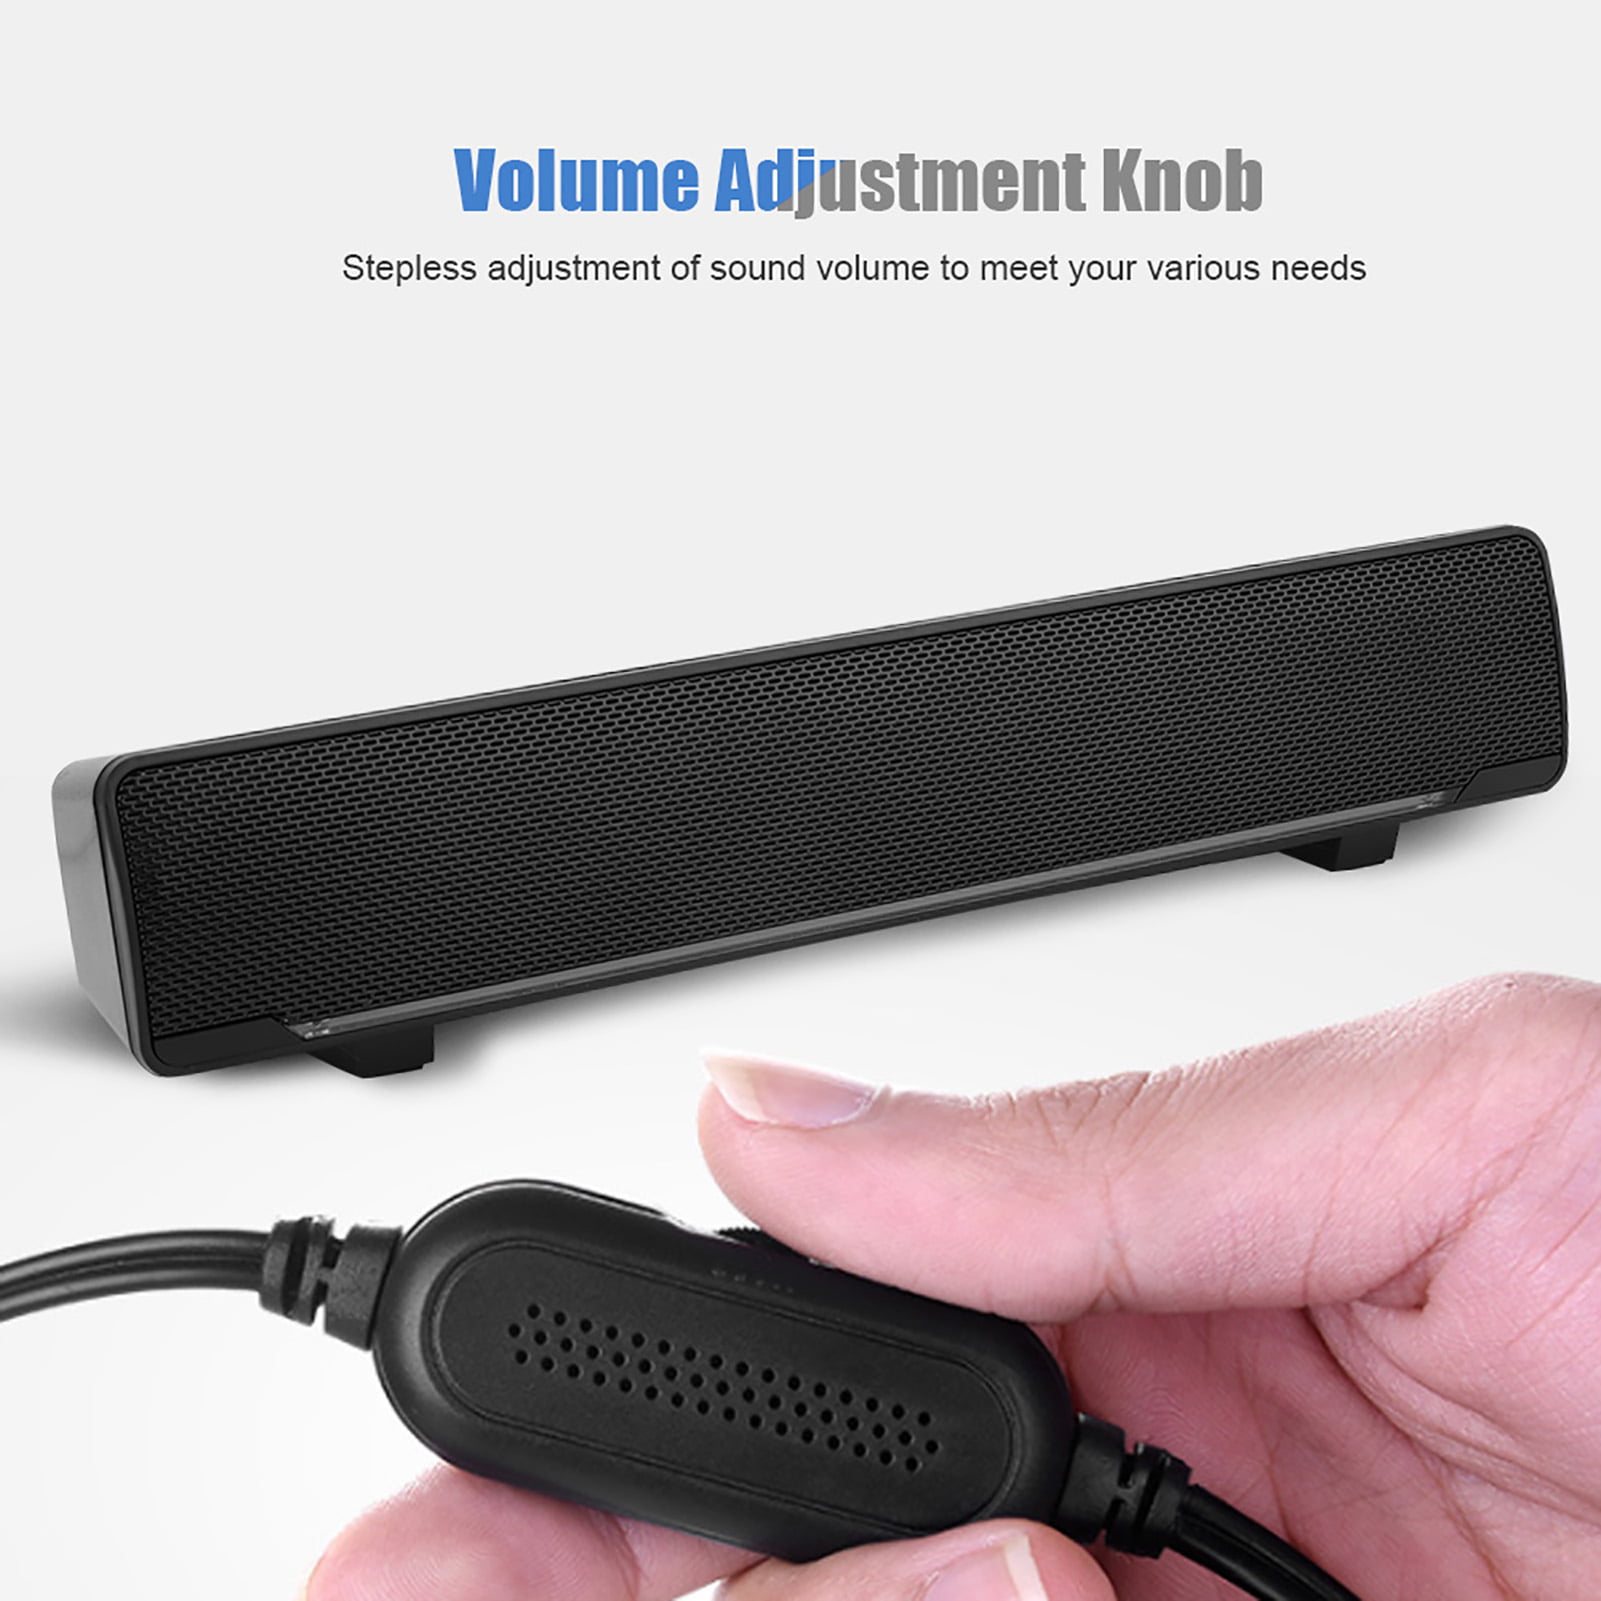 12.6 x 2.5 x 2.7 inch USB Wired Stereo Soundbar Music Player Bass Surround Sound Box with 3.5mm Input for Desktop Laptop TV Smartphone Tablet PC MP3 MP4 Black Wired Speakers Black